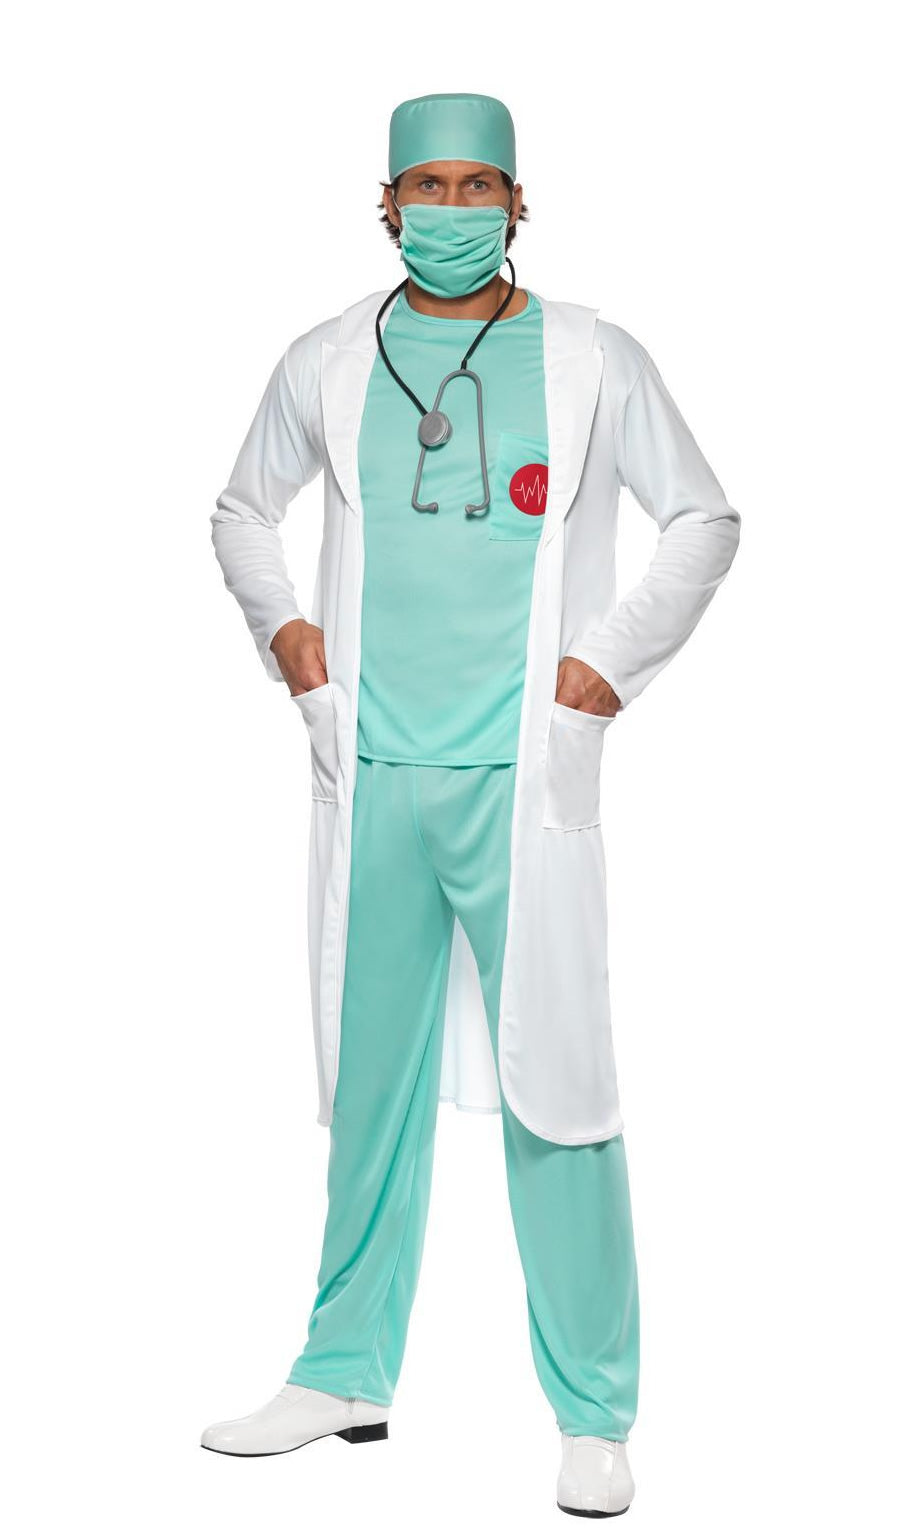 Alternate view of ER doctors uniform, hat and mask in green with white coat